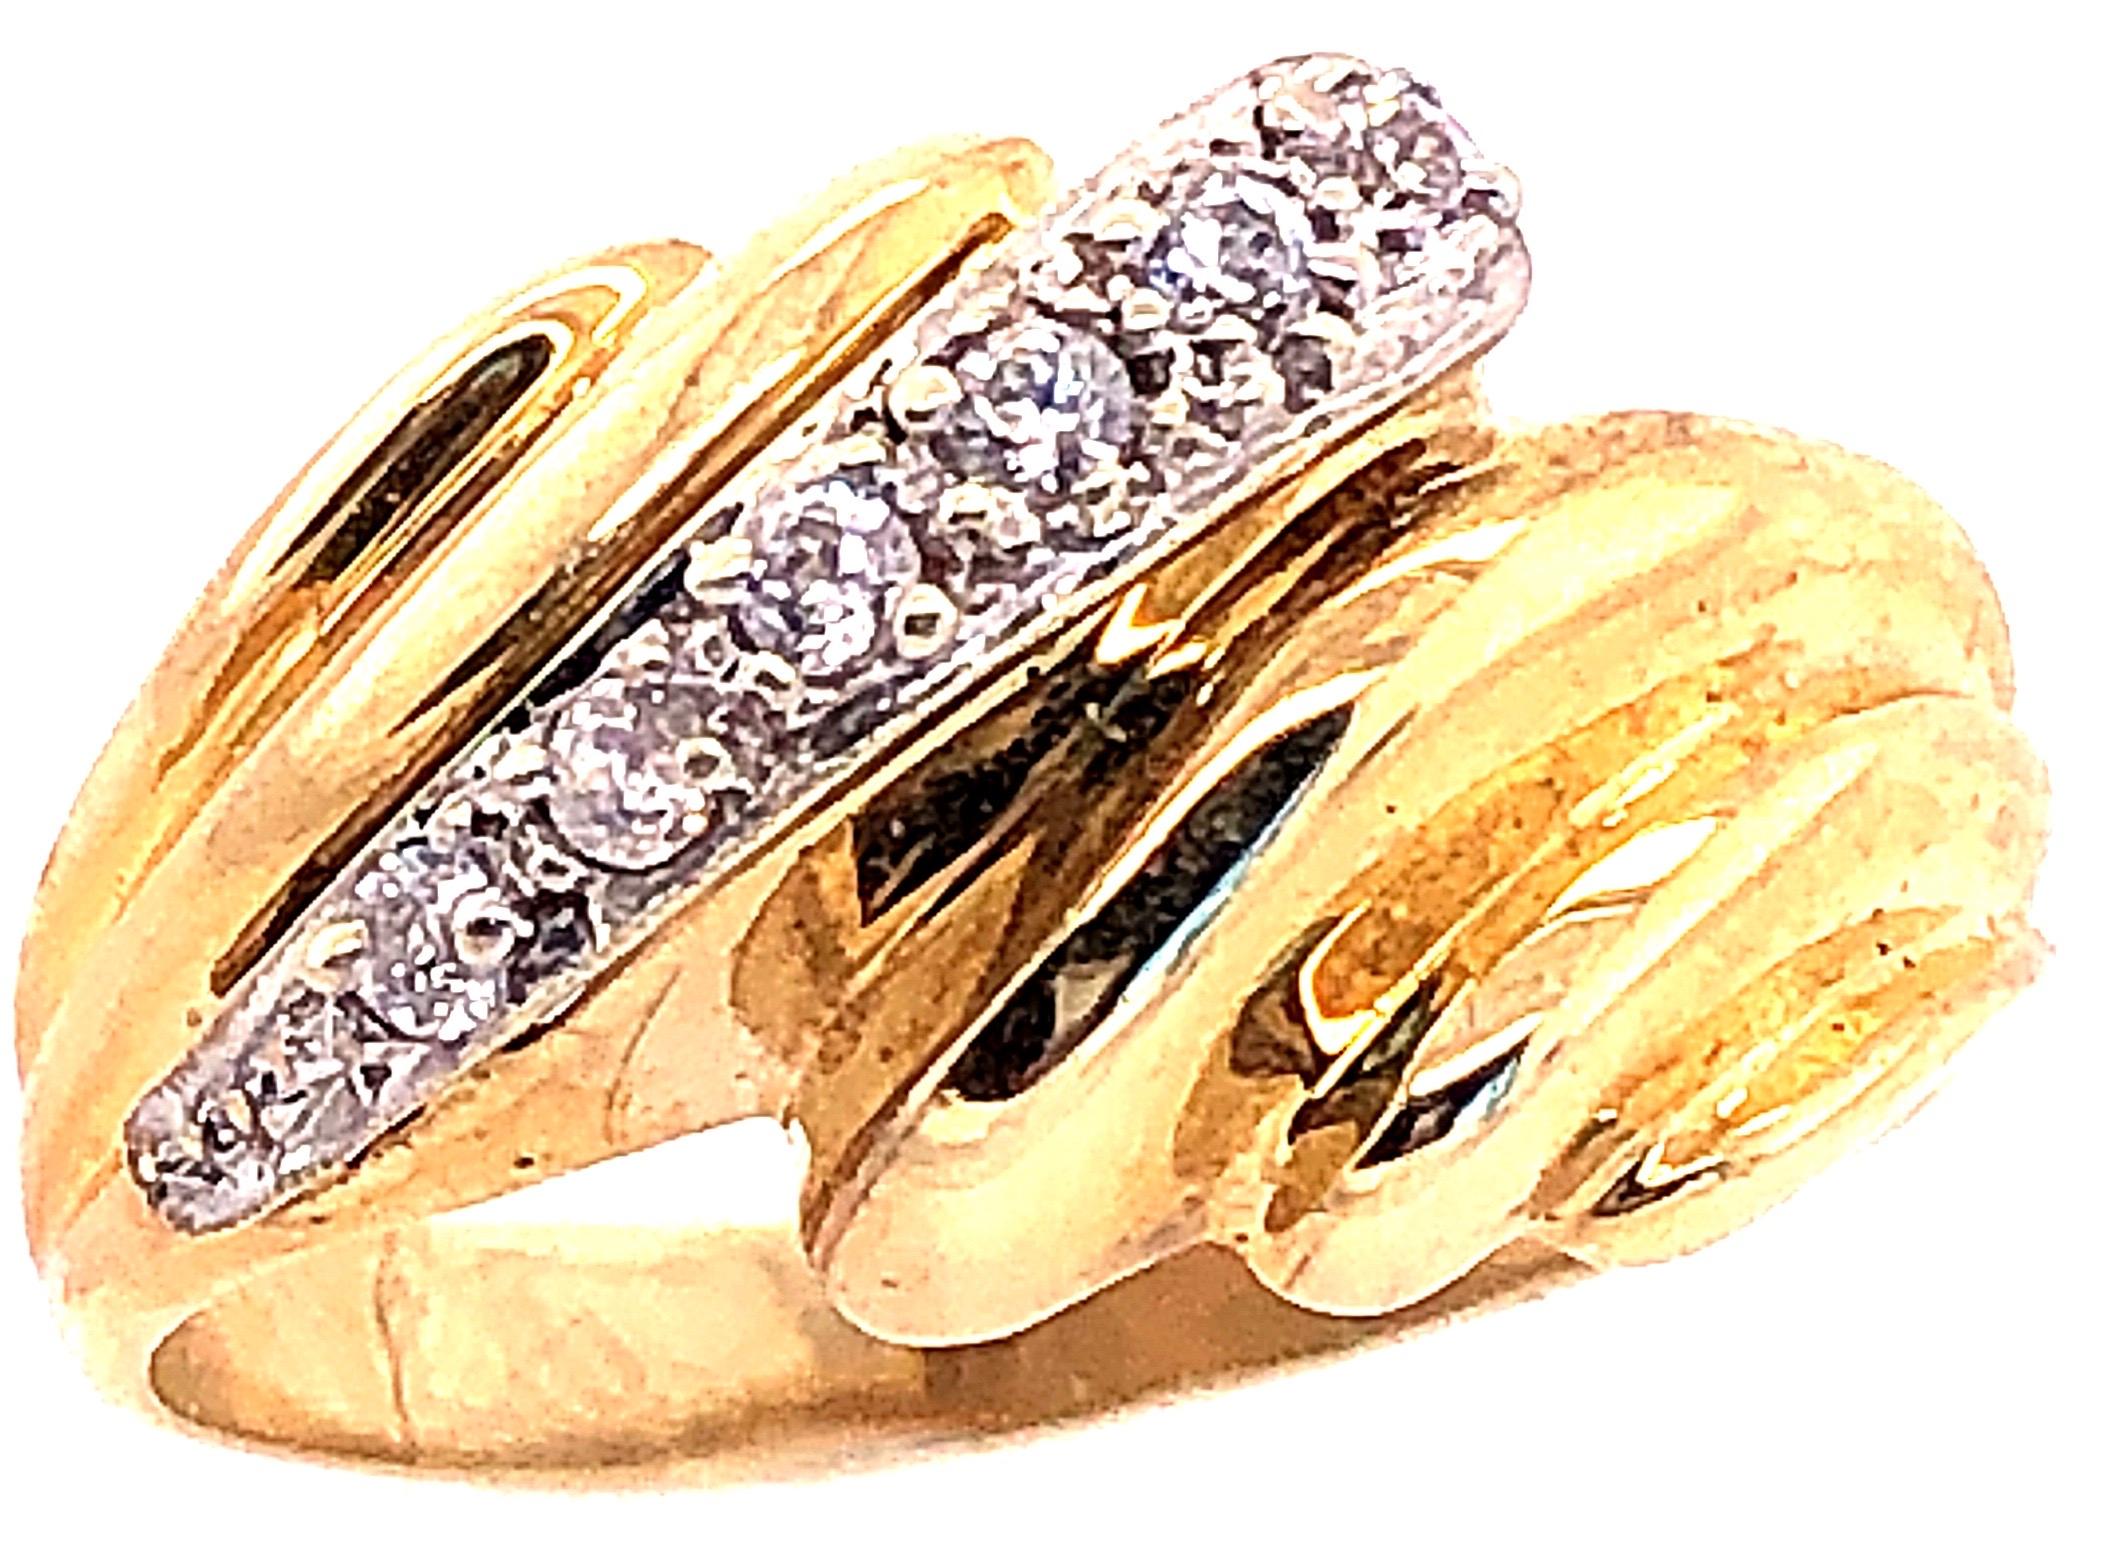 14 Karat Yellow and White Gold Fashion Ring with Round Diamonds Size 7.
0.25 total diamond weight.
4.06 grams total weight.